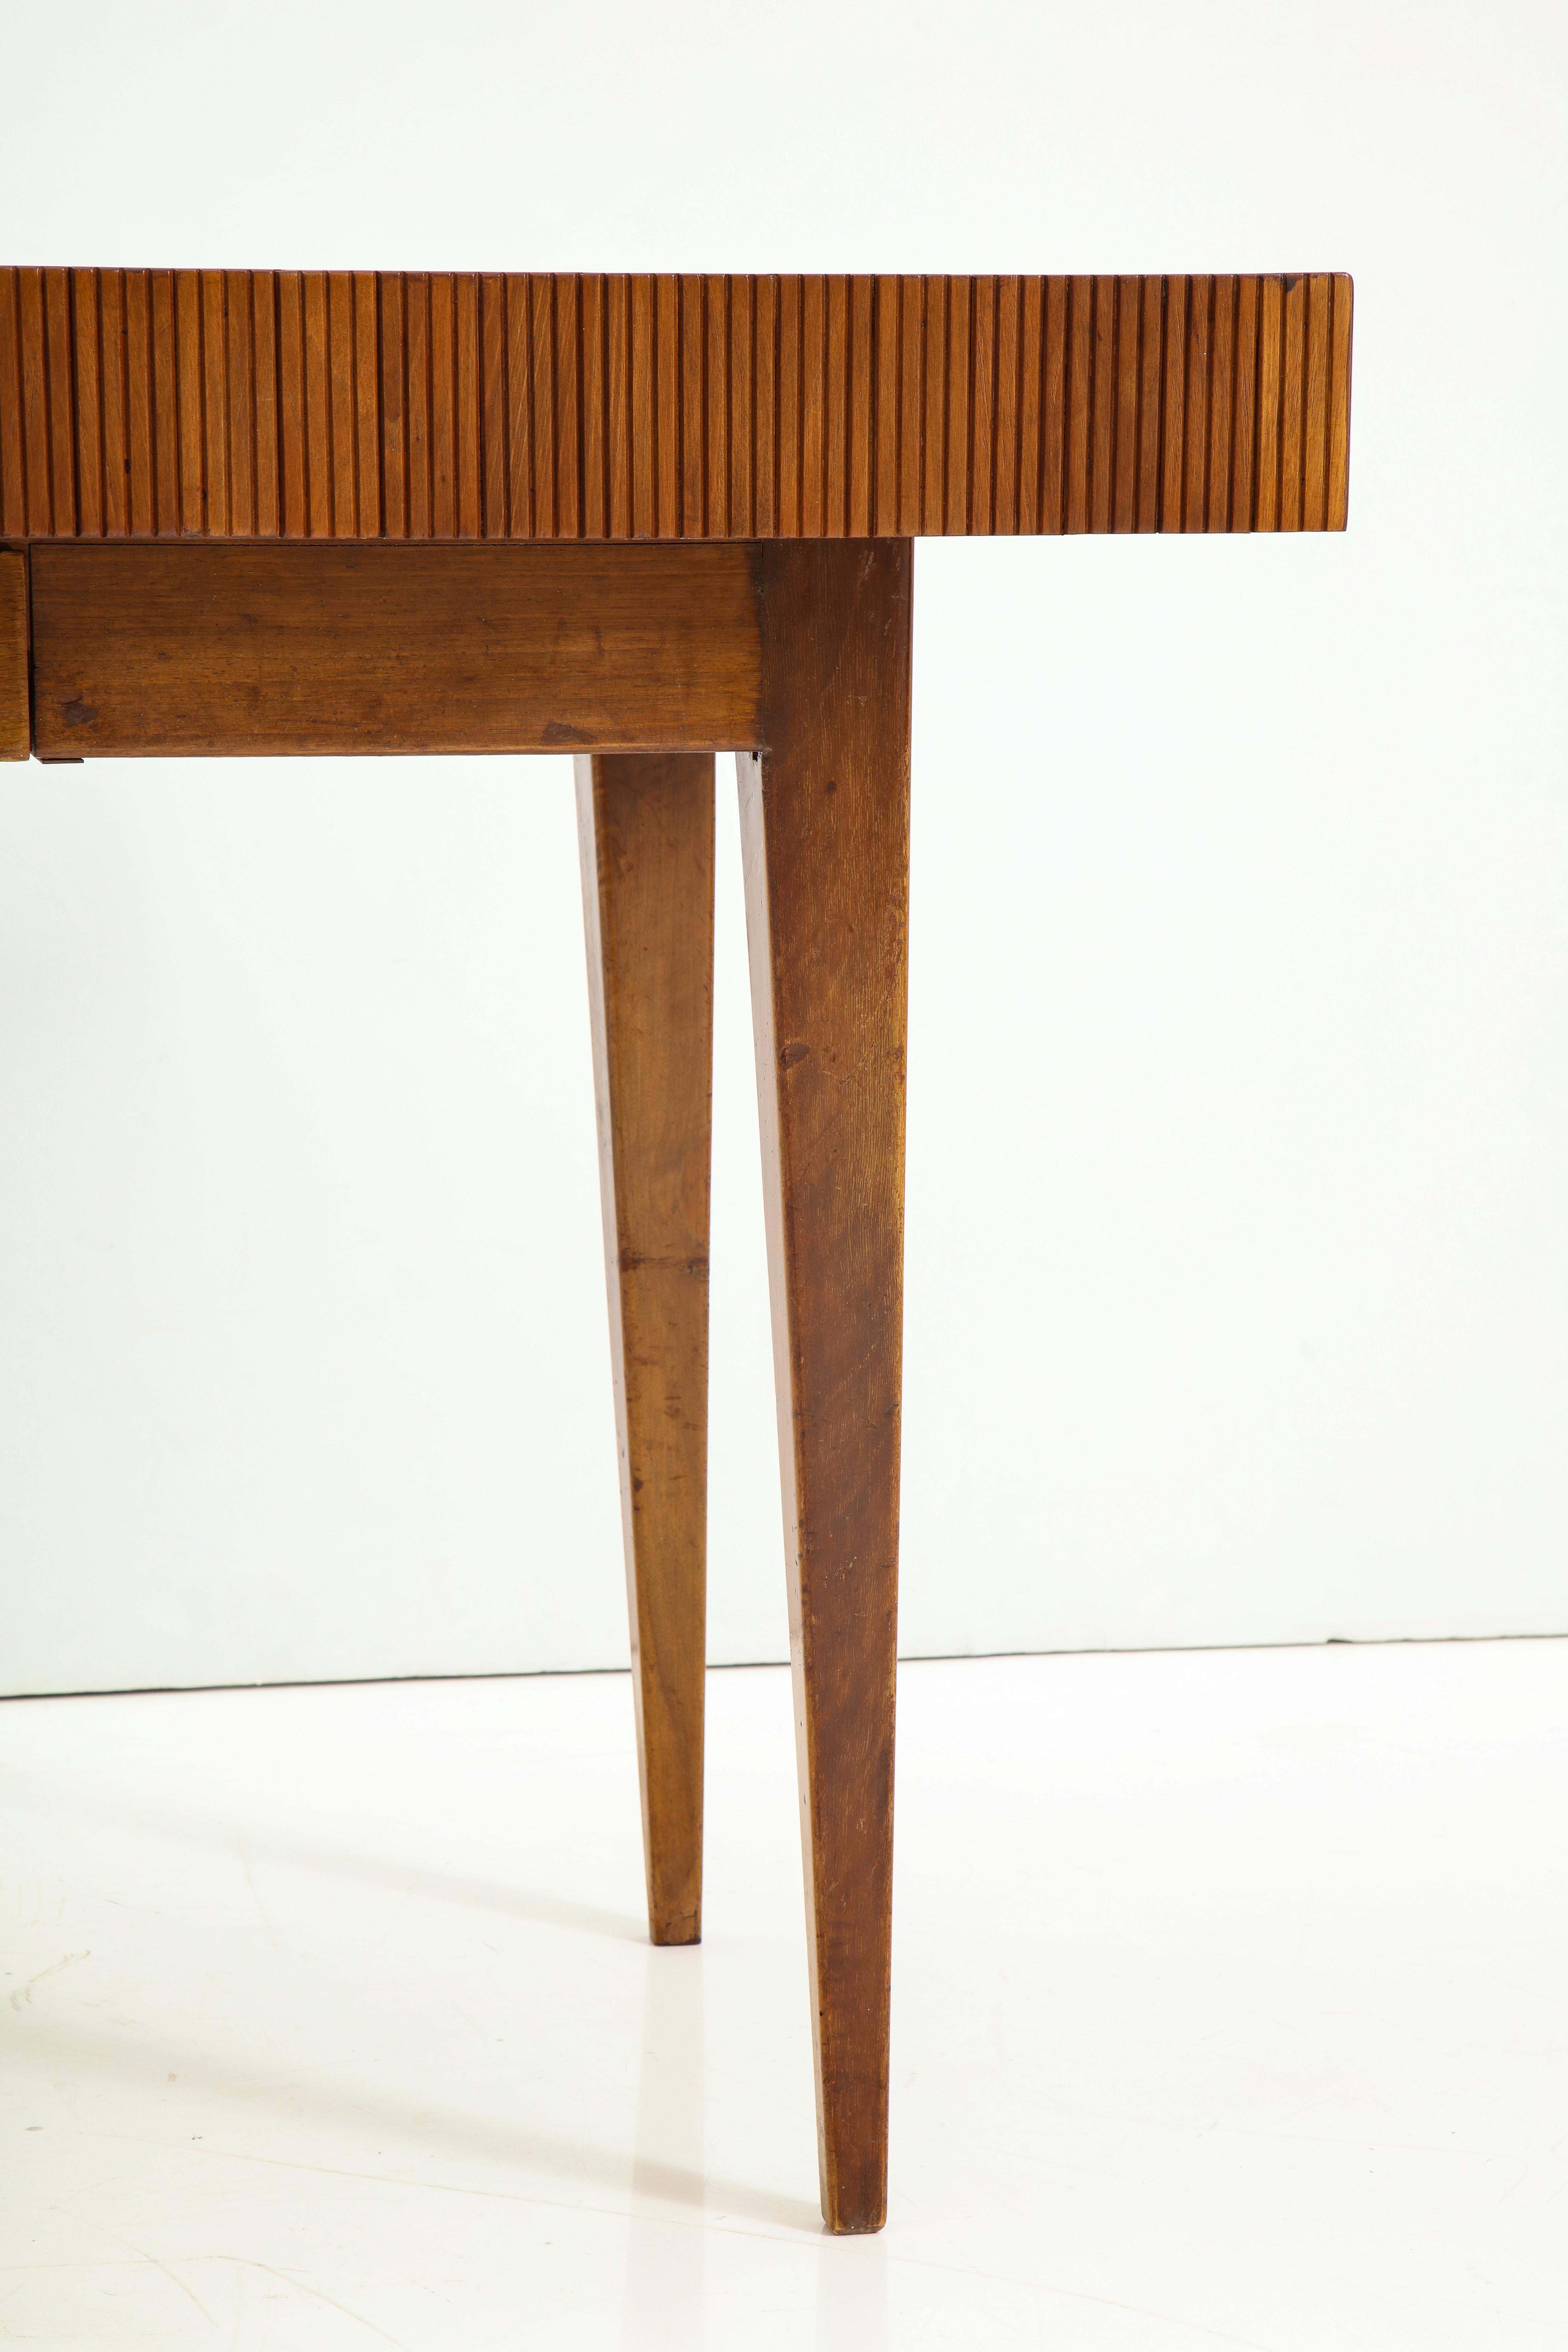 Italian Walnut Table with Single Drawer and Tapered Legs, Style of Gio Ponti 8